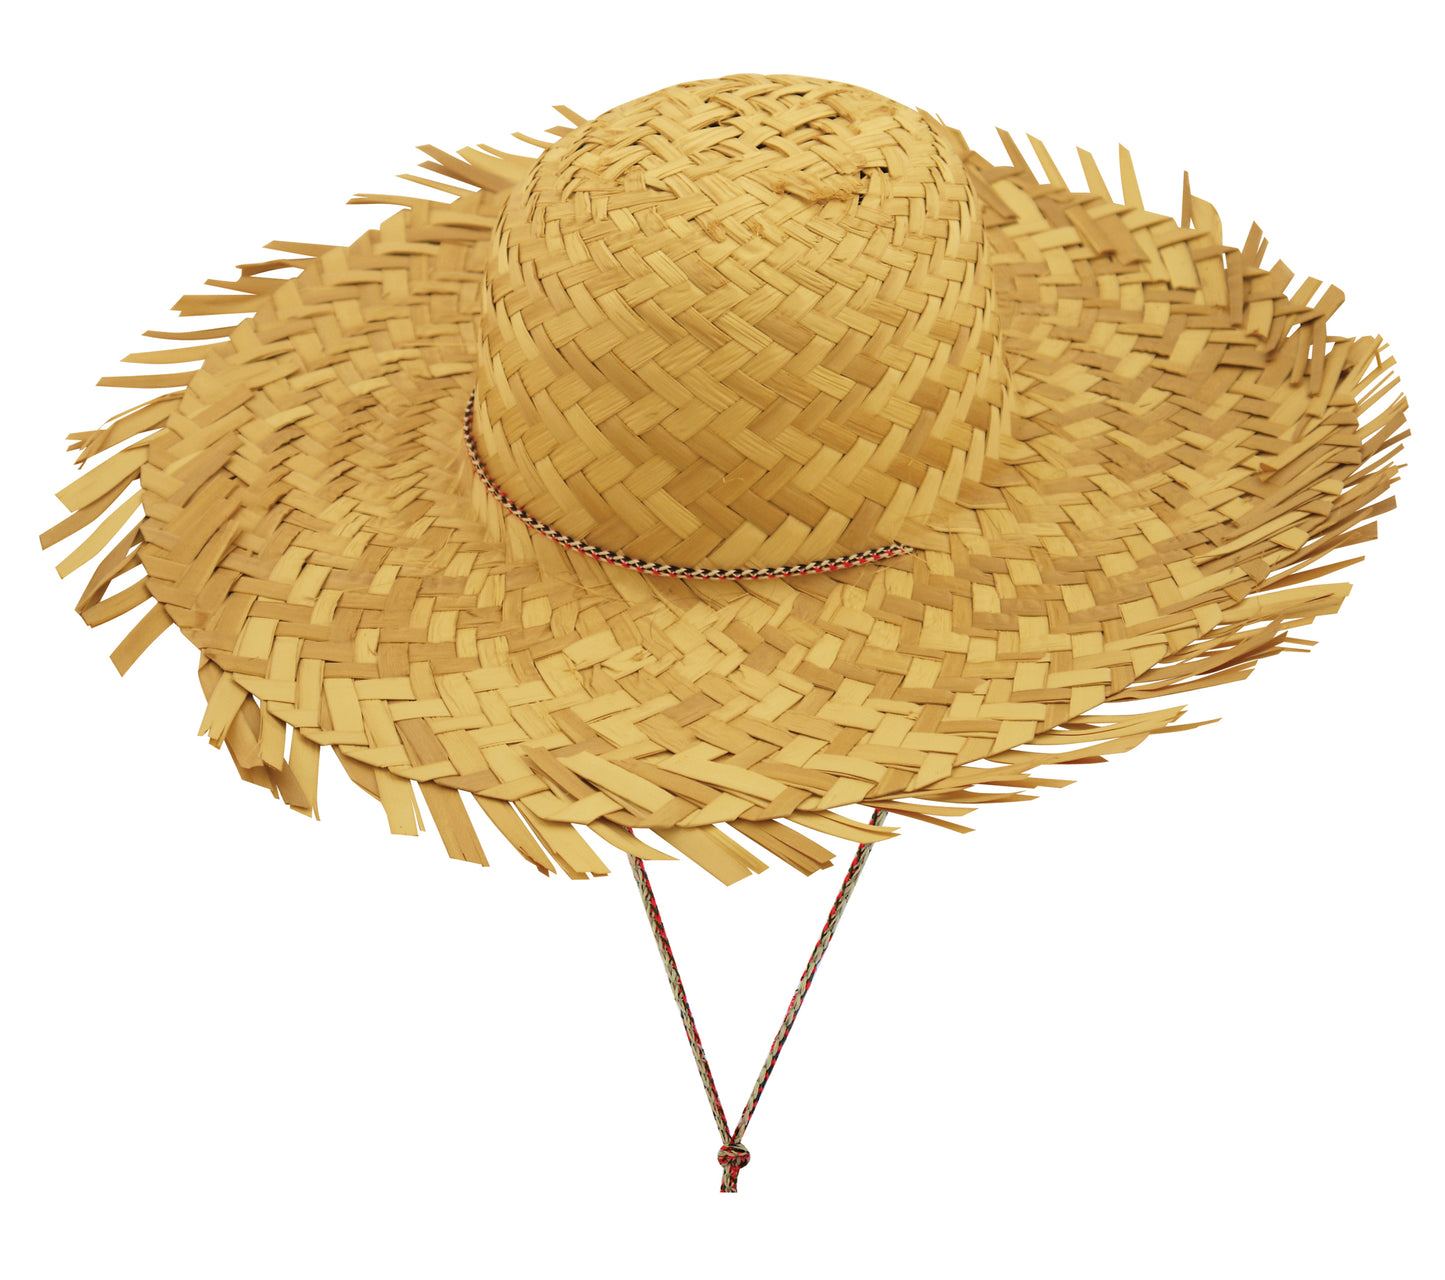 Female Straw Beachcomber Hat with String Pineapple Glasses Hawaiian Hula Party Fancy Dress Set